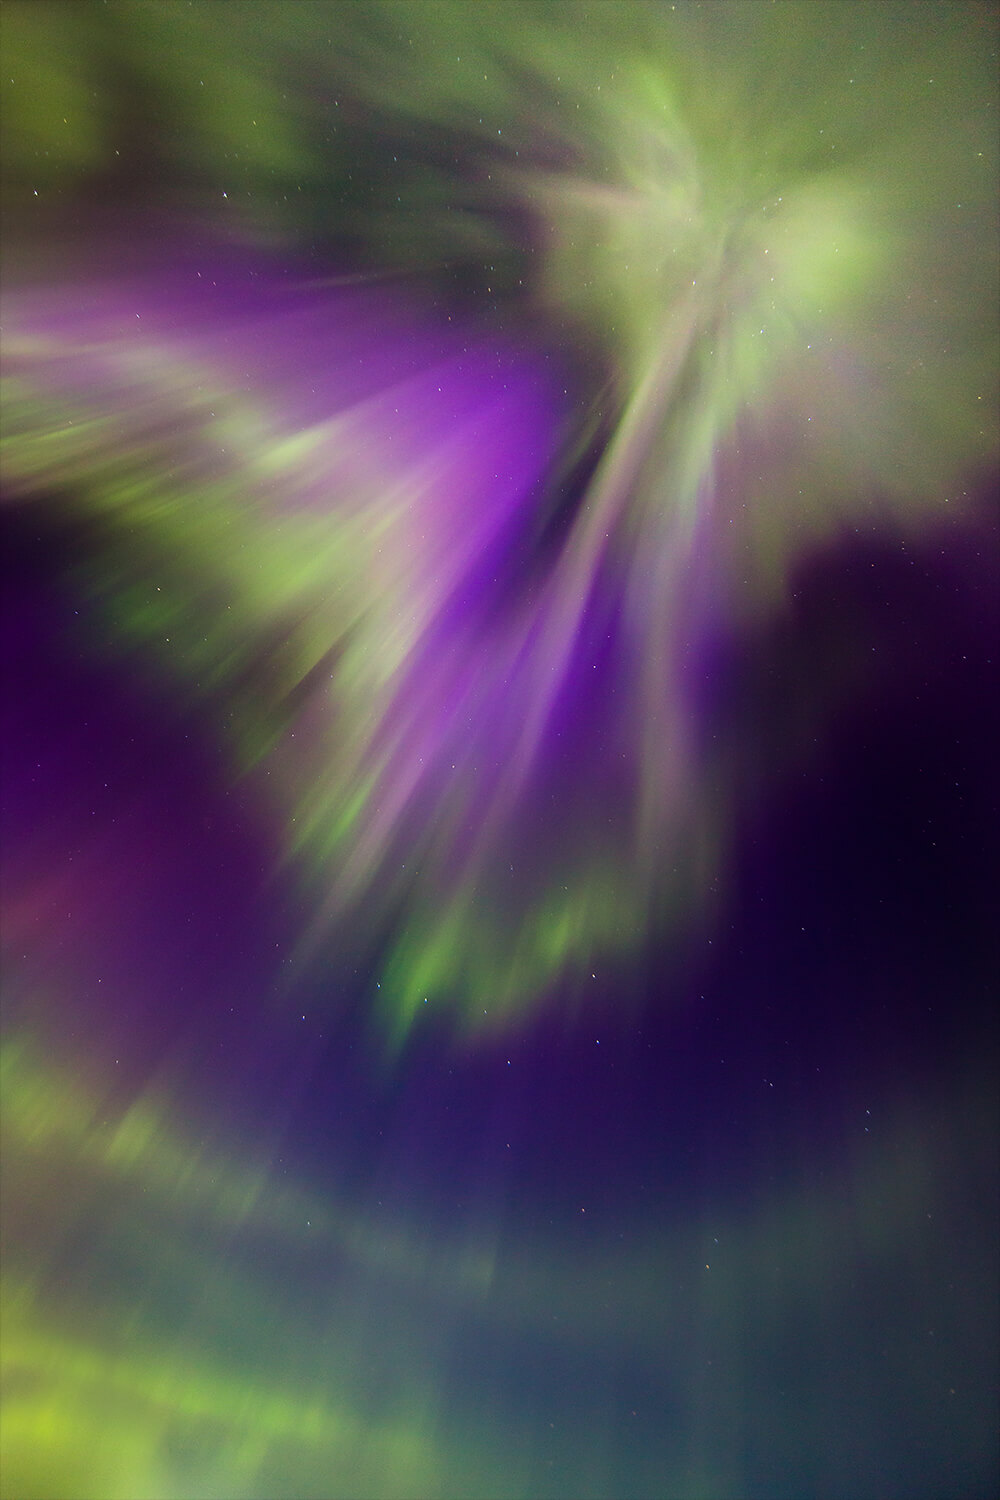 photo of the Northern lights with green and purple tones. Shot by Neil Bloem